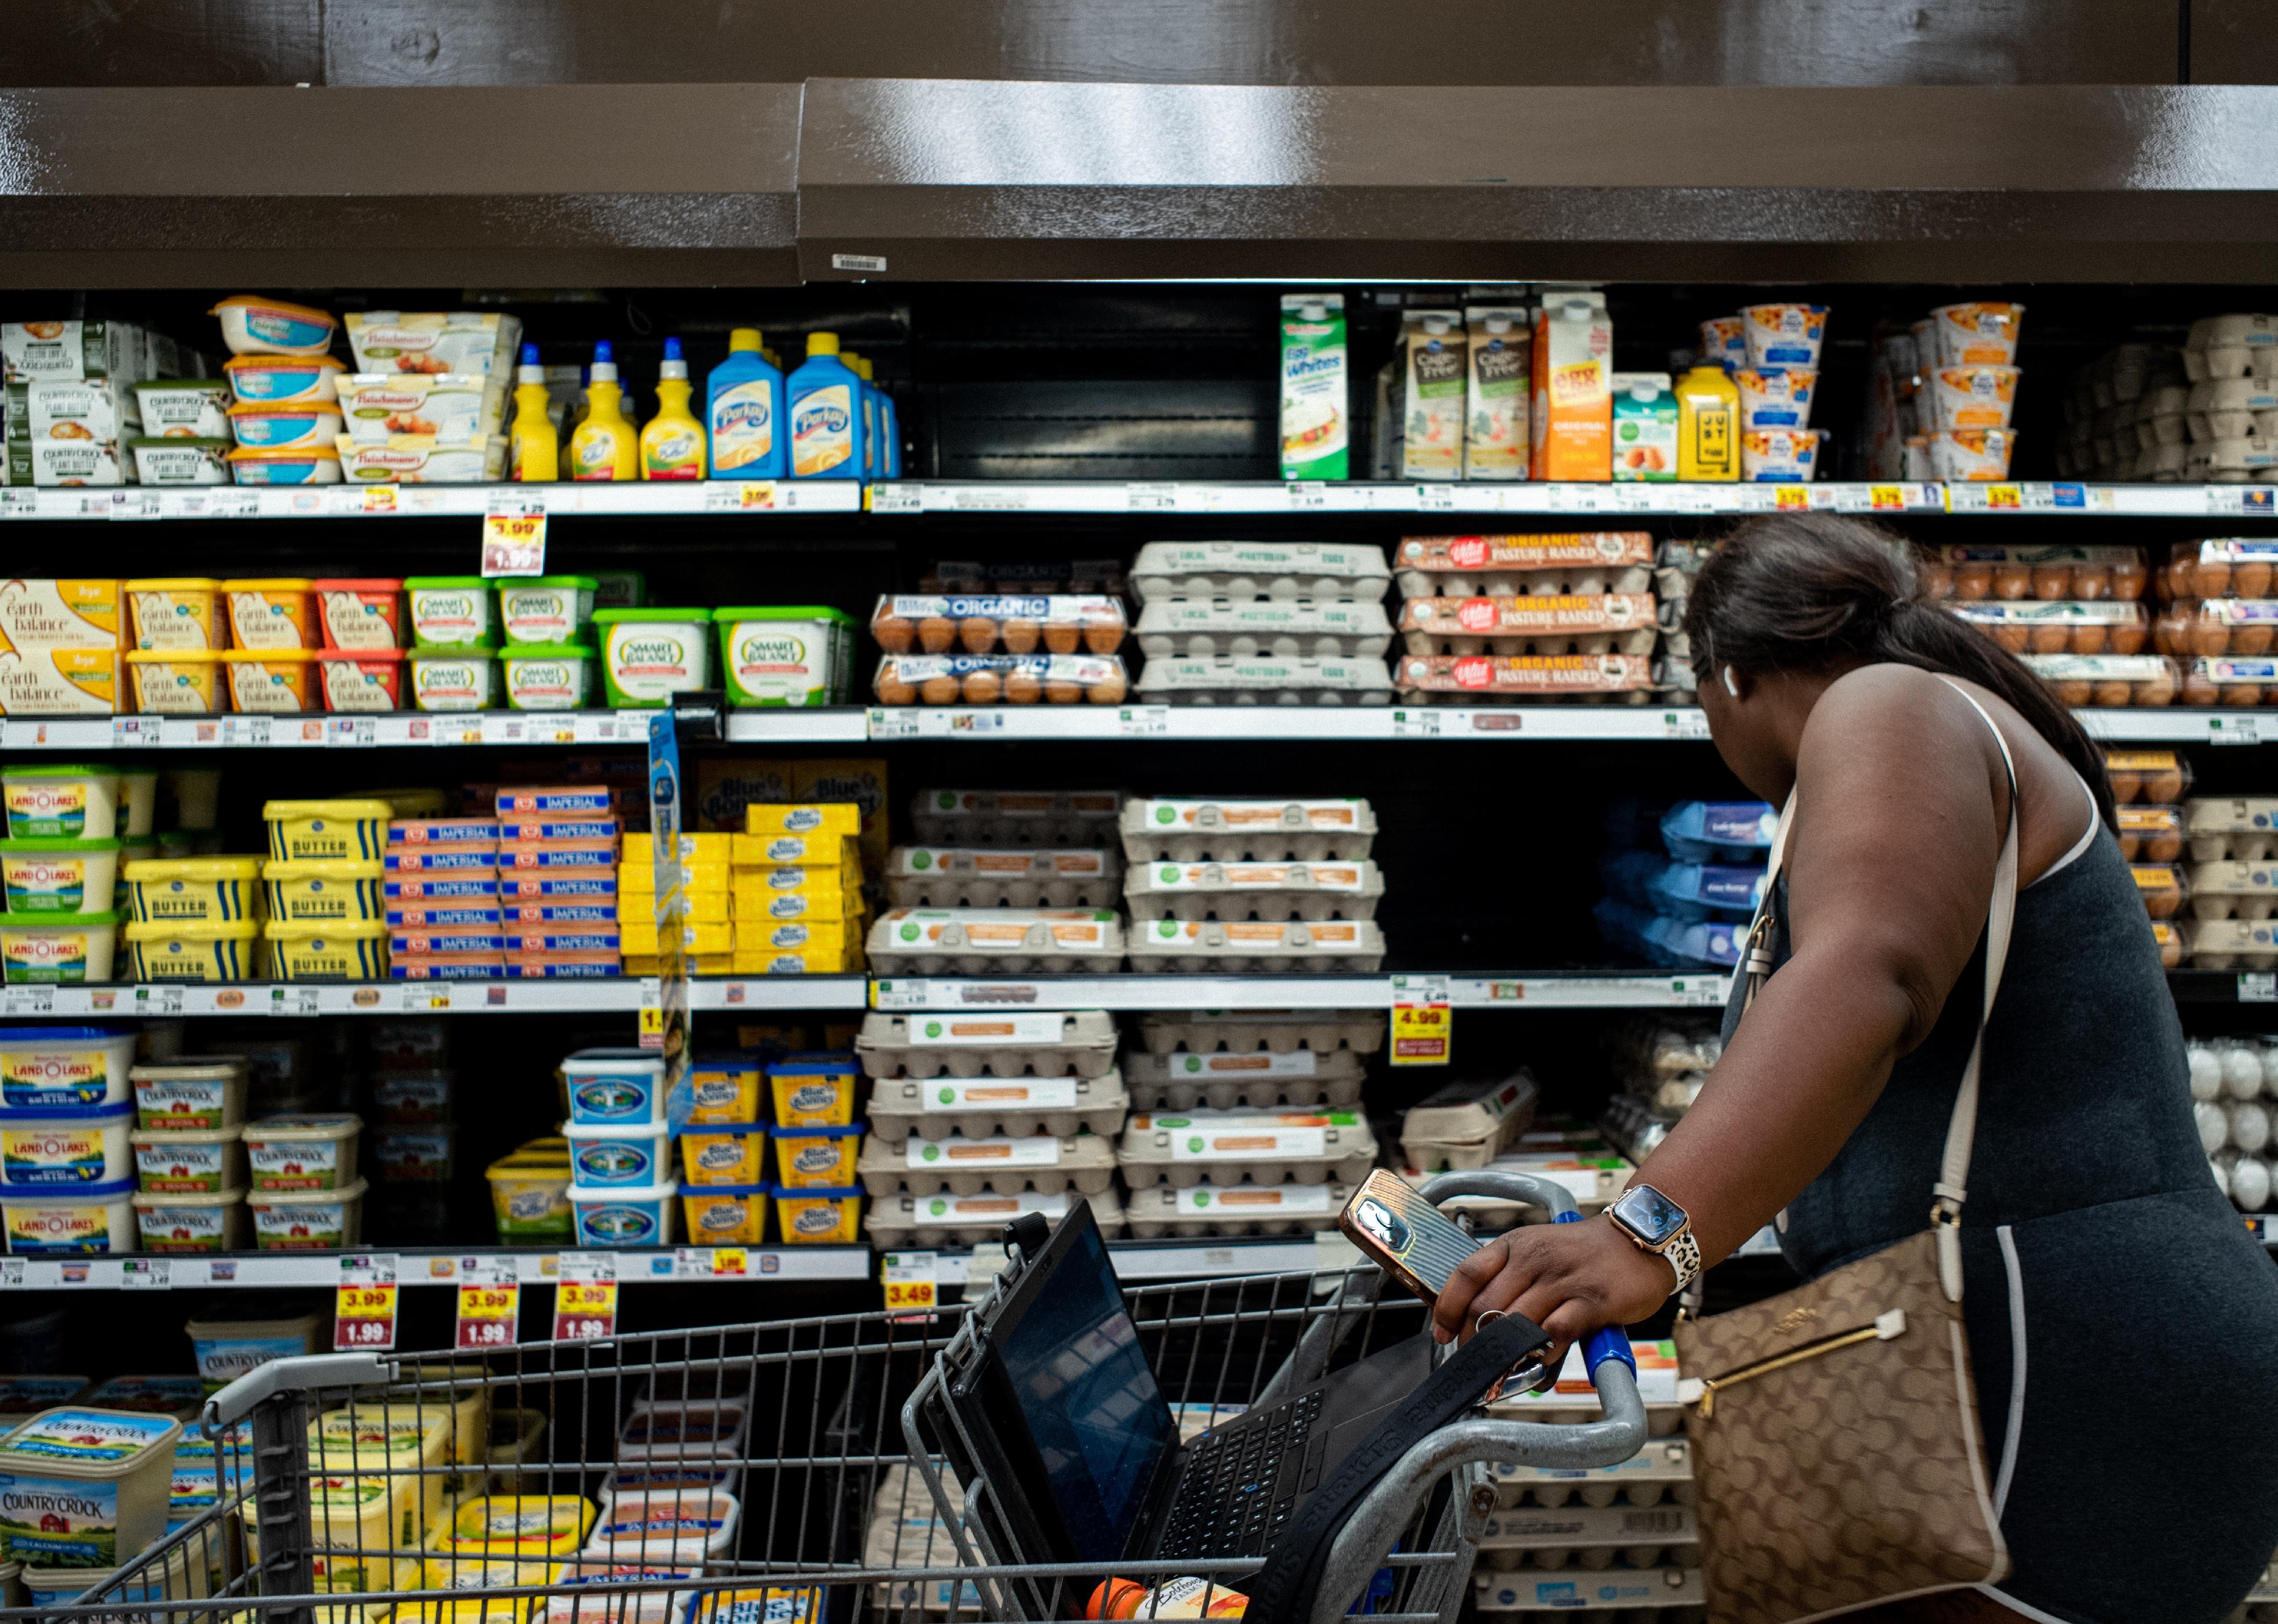 A woman shops for eggs in a grocery store.